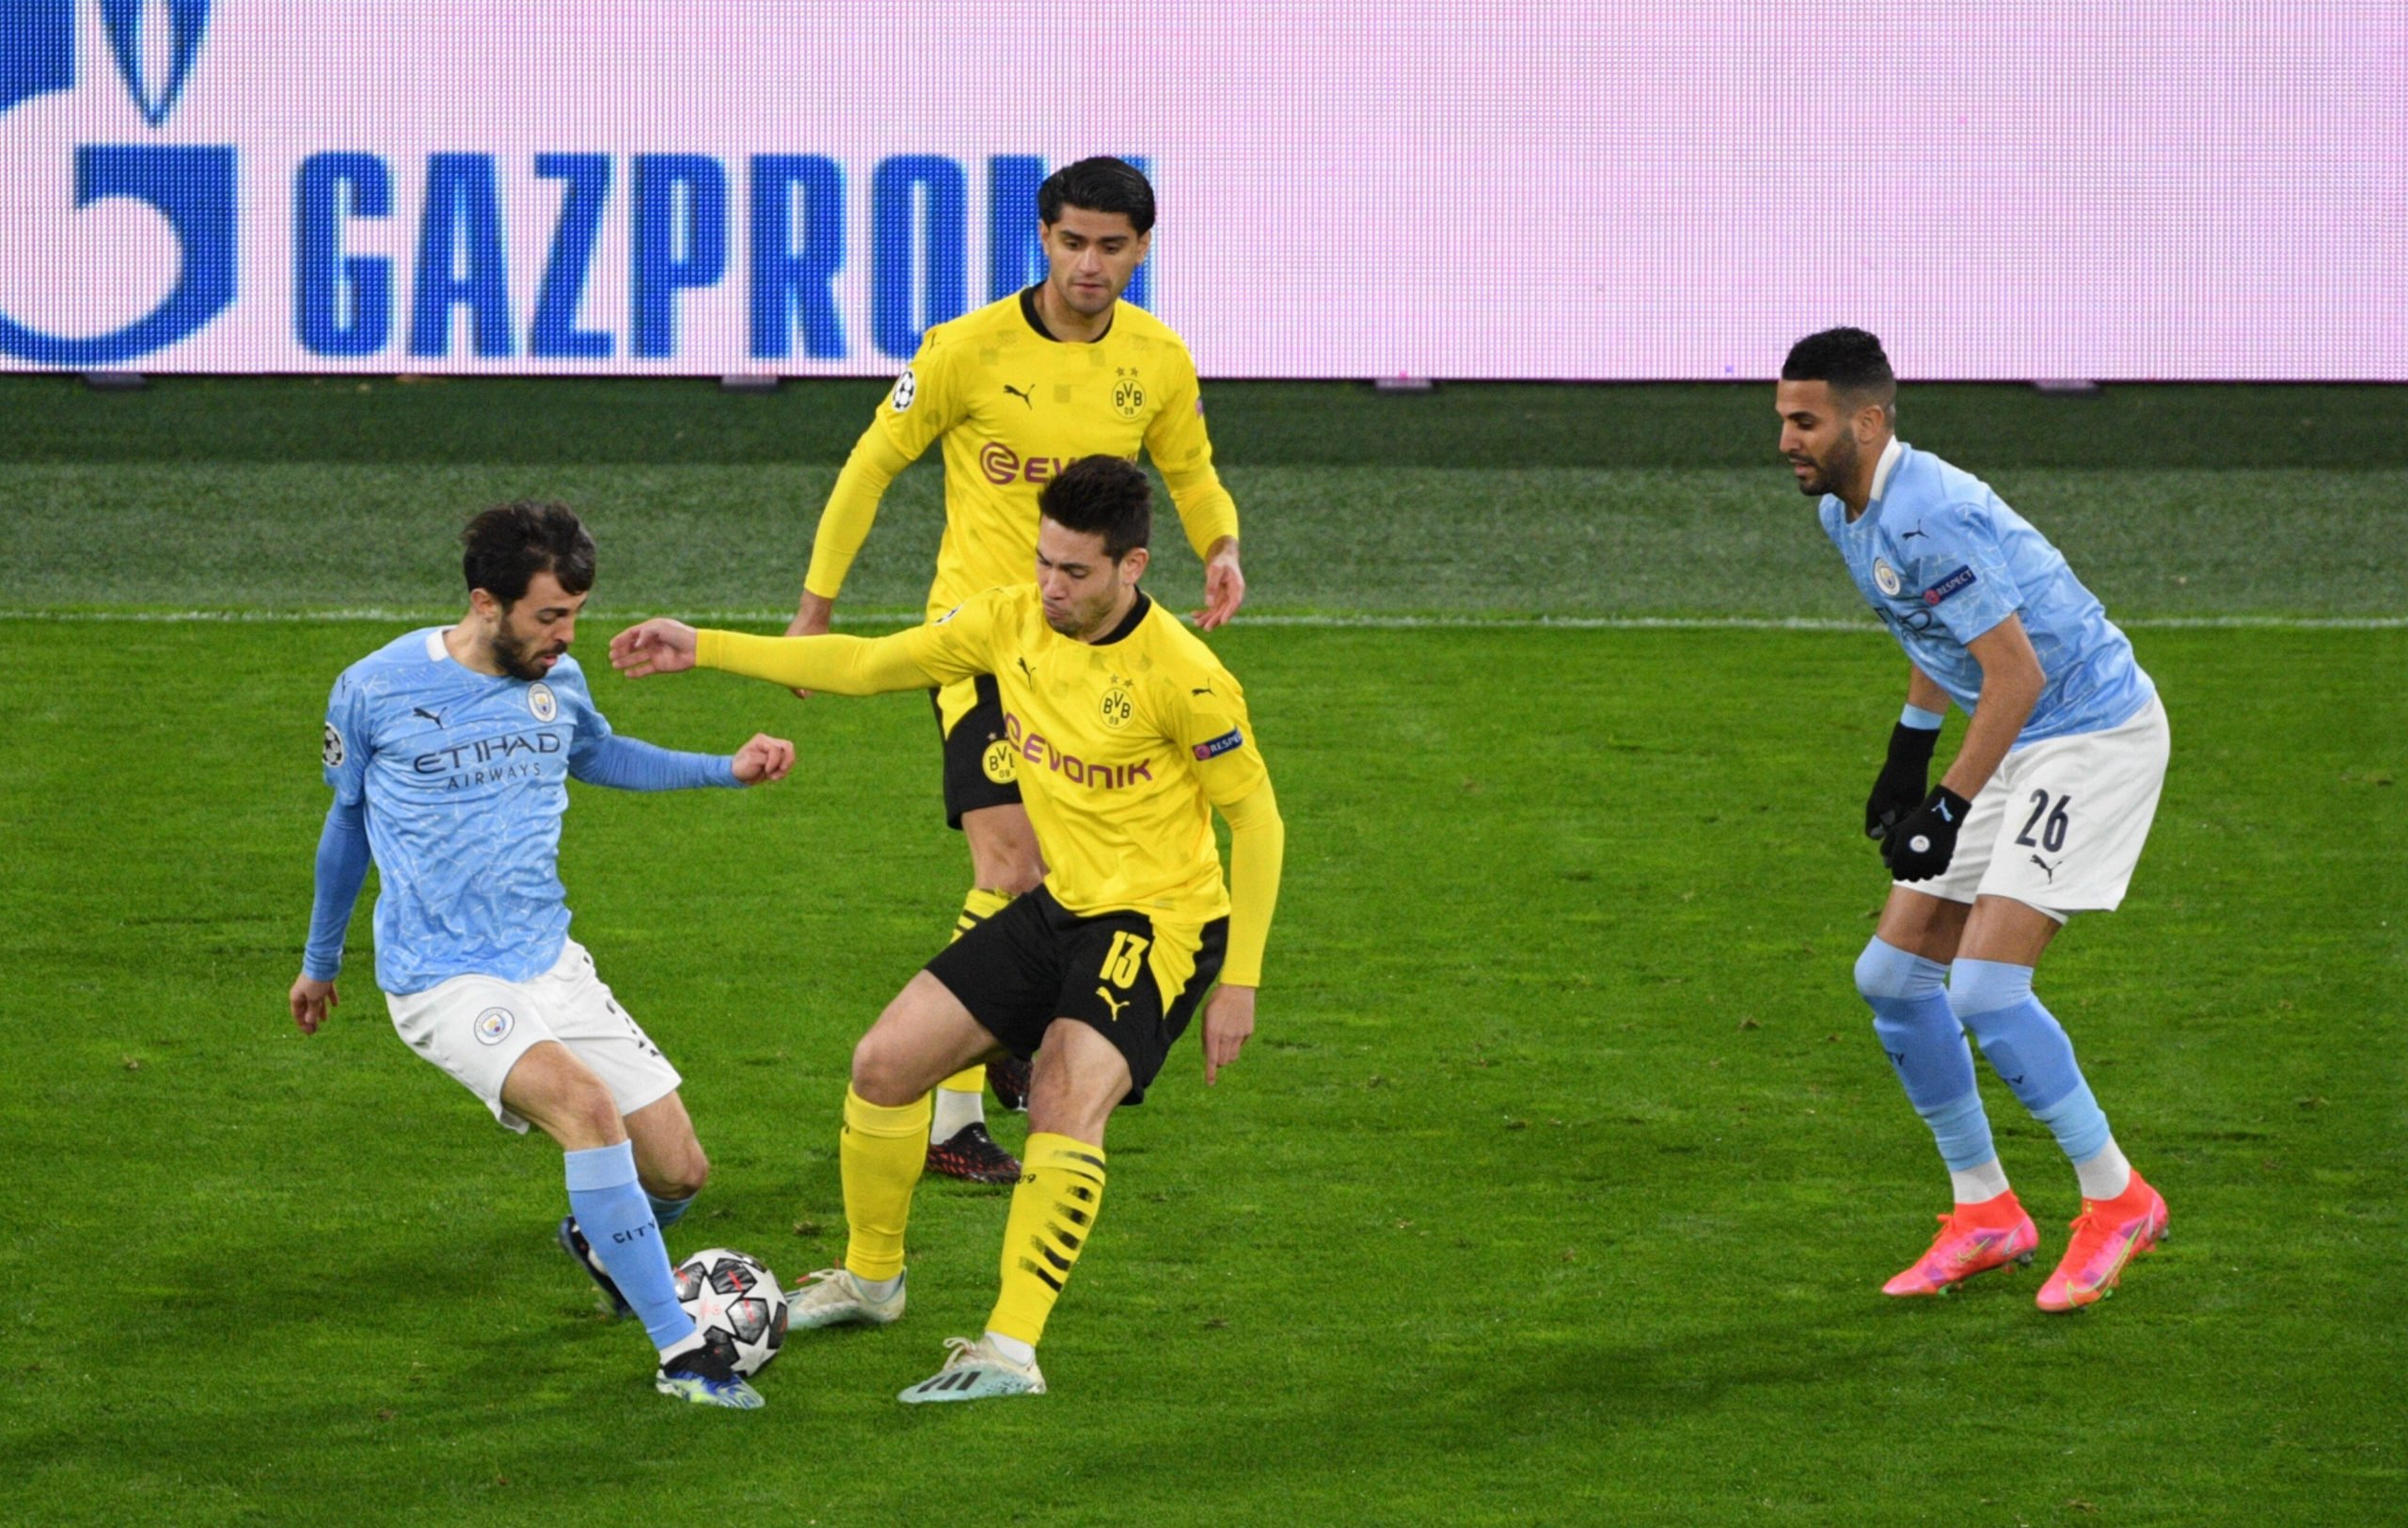 Manchester City's Silva hoping to seal a move to Spain (Silva is seen in the photo)